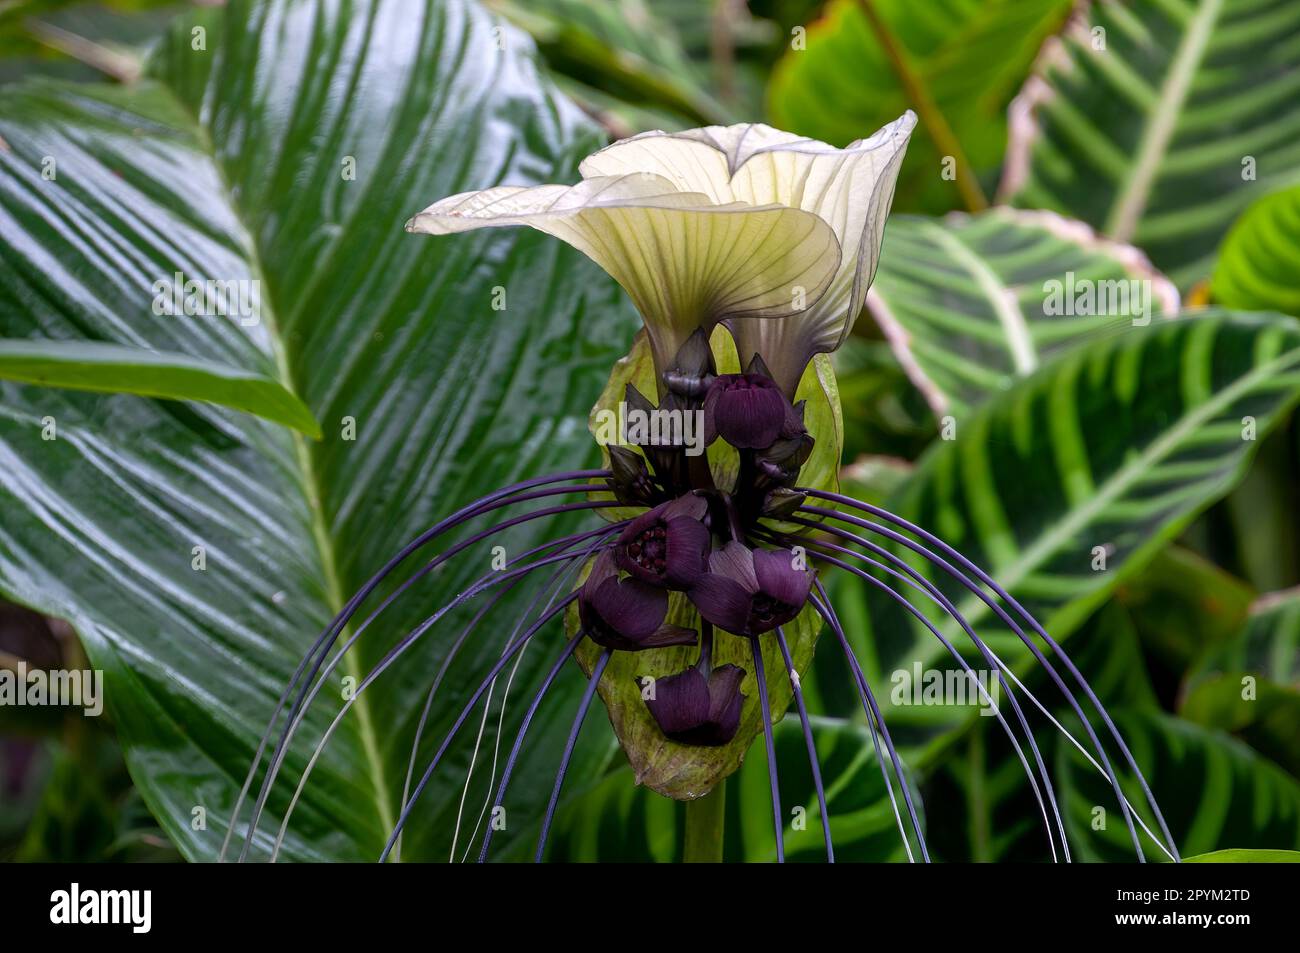 Sydney Australia, unusual flower of a tacca integrifolia or white batflower, native to tropical and subtropical rainforests of Central Asia  Keywords Stock Photo